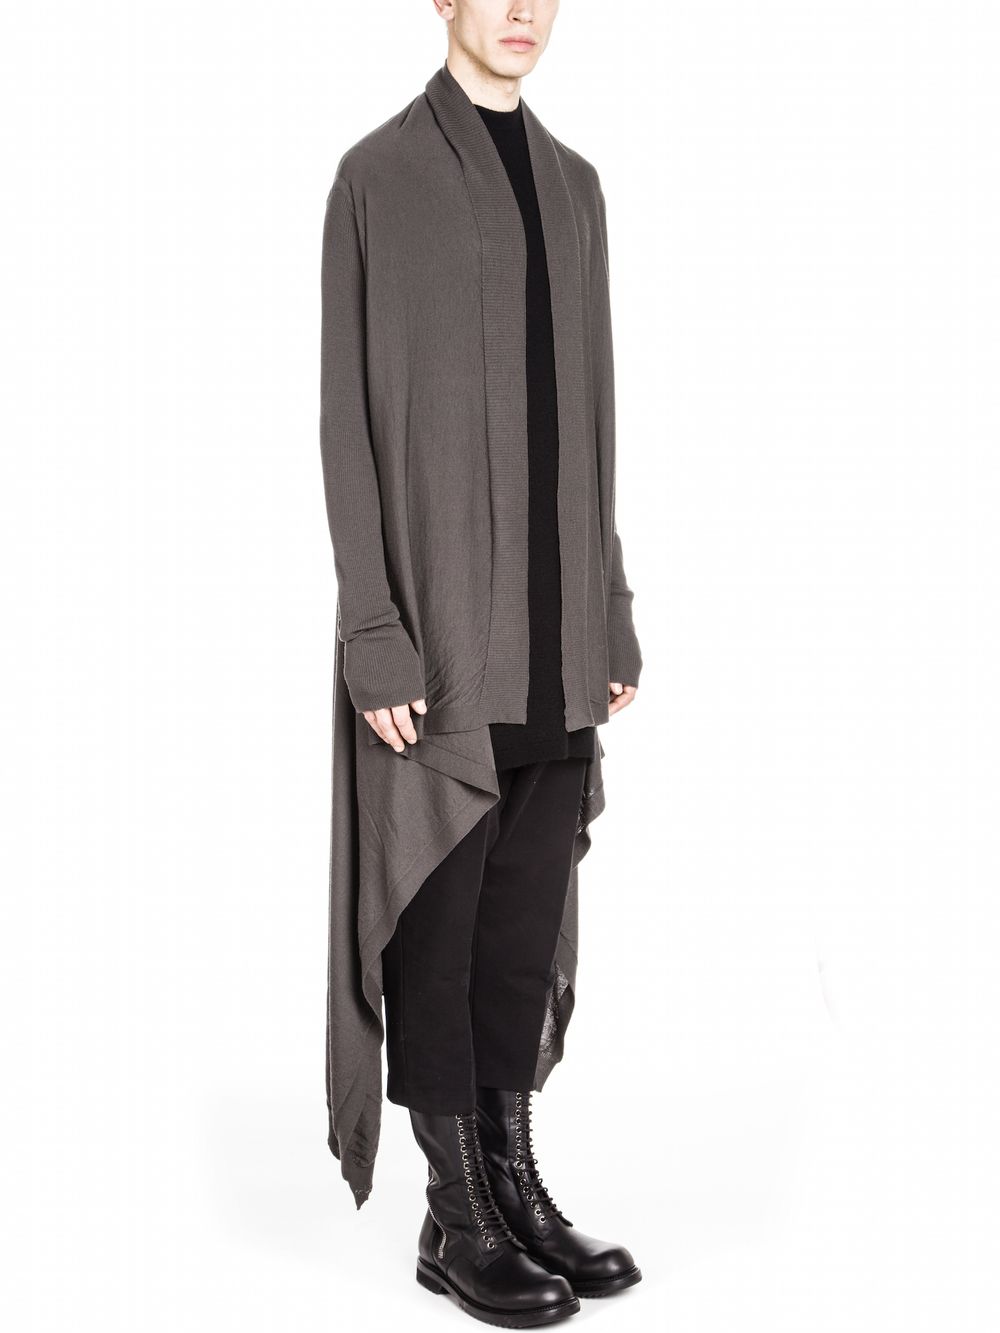 Rick Owens Brand New FW16 Long Cardigan Size US M / EU 48-50 / 2 - 1 Preview